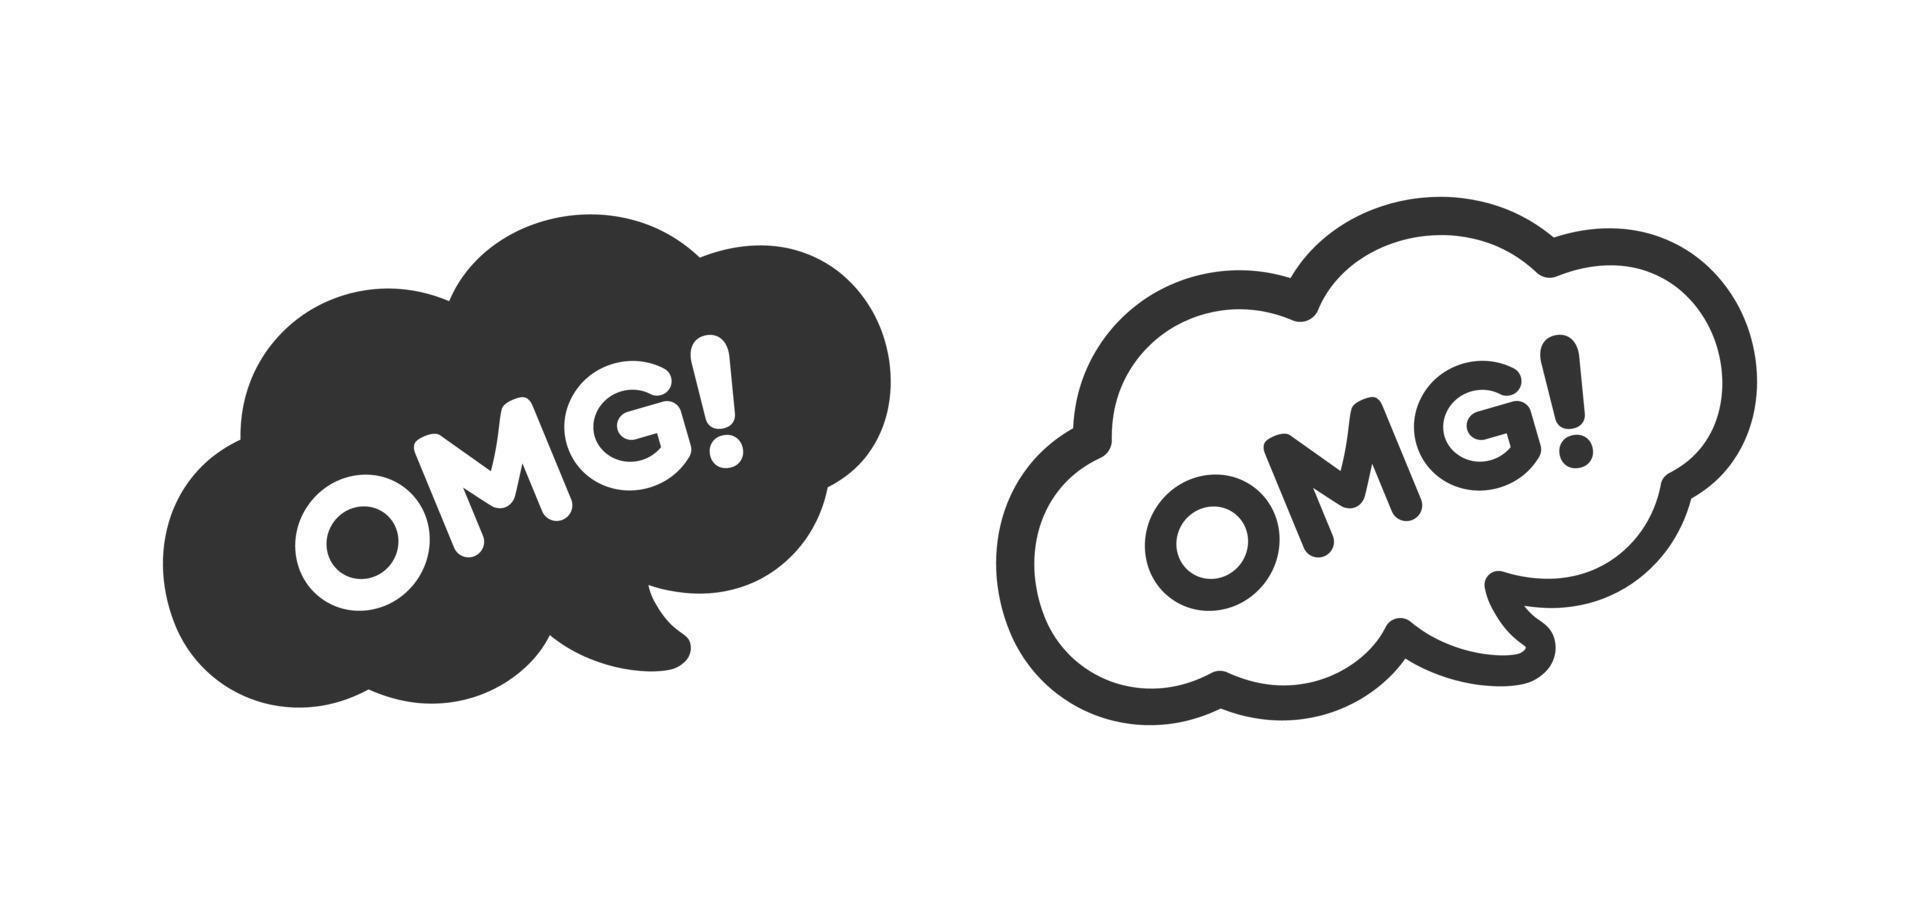 OMG speech bubble chat online messaging icon. Cute black text lettering vector illustration.